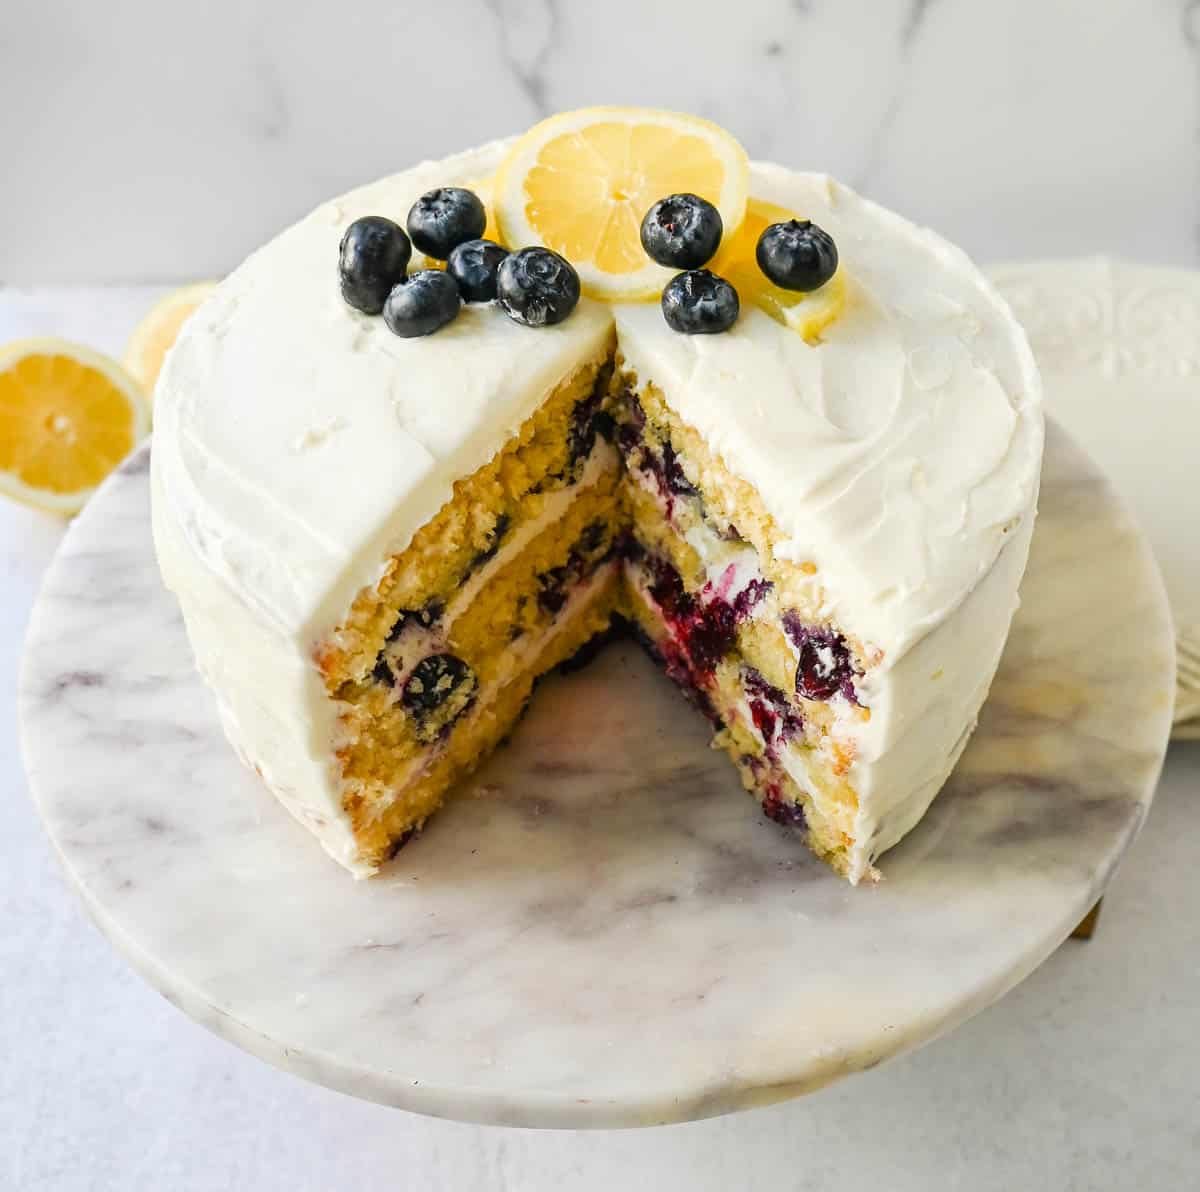 Light, fluffy, moist lemon cake with with fresh blueberries with a sweet cream cheese frosting. This is the best lemon blueberry cake recipe!